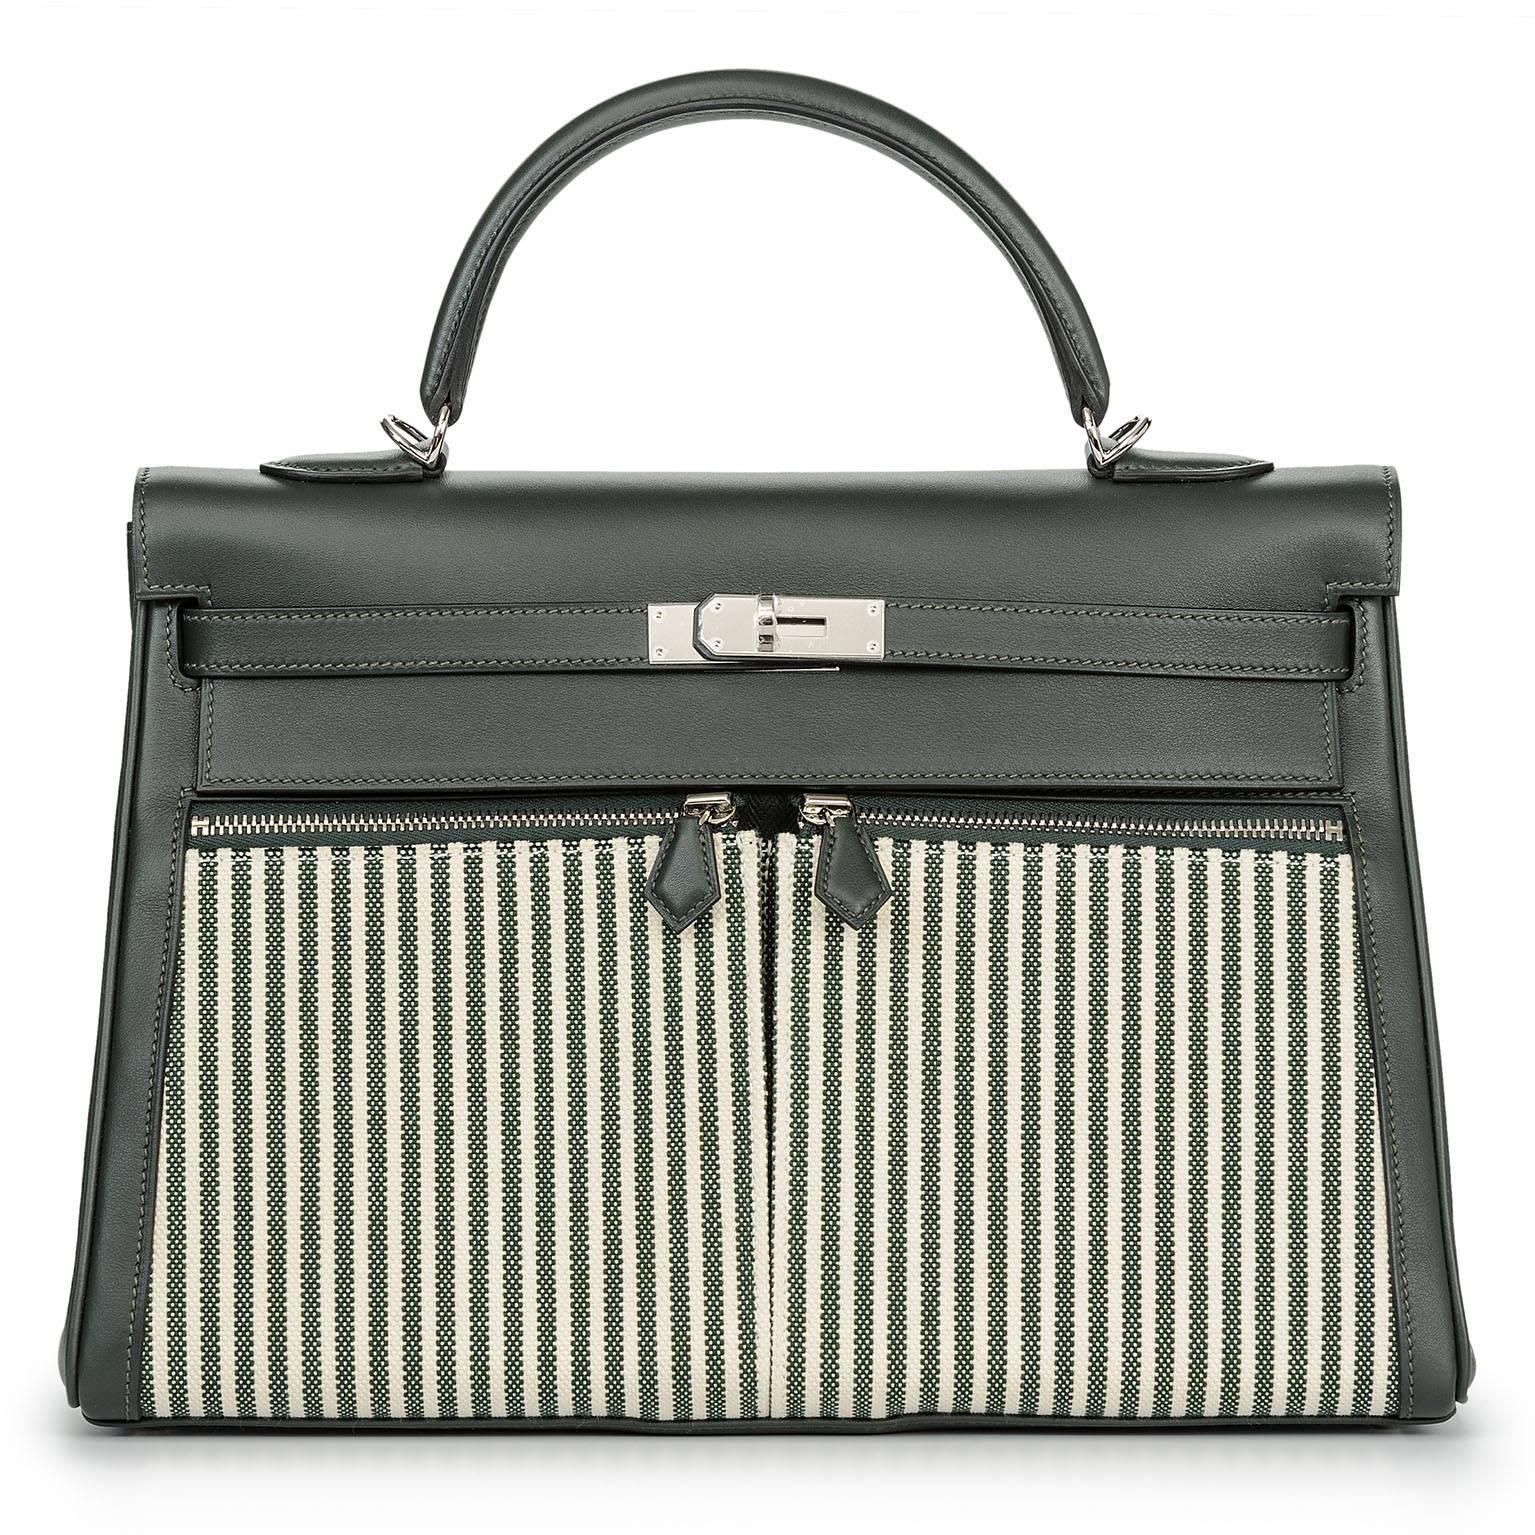 ONLY ONE ON STDIBS!

Ultra limited!

Collectors item!

NEW FULL SET KELLY LAKIS BAG 

Kelly Lakis 35 cm made from swift leather in Vert Foncé colour combined with striped canvas toile in ecru and vert anglais.

The bag is NEW and comes as